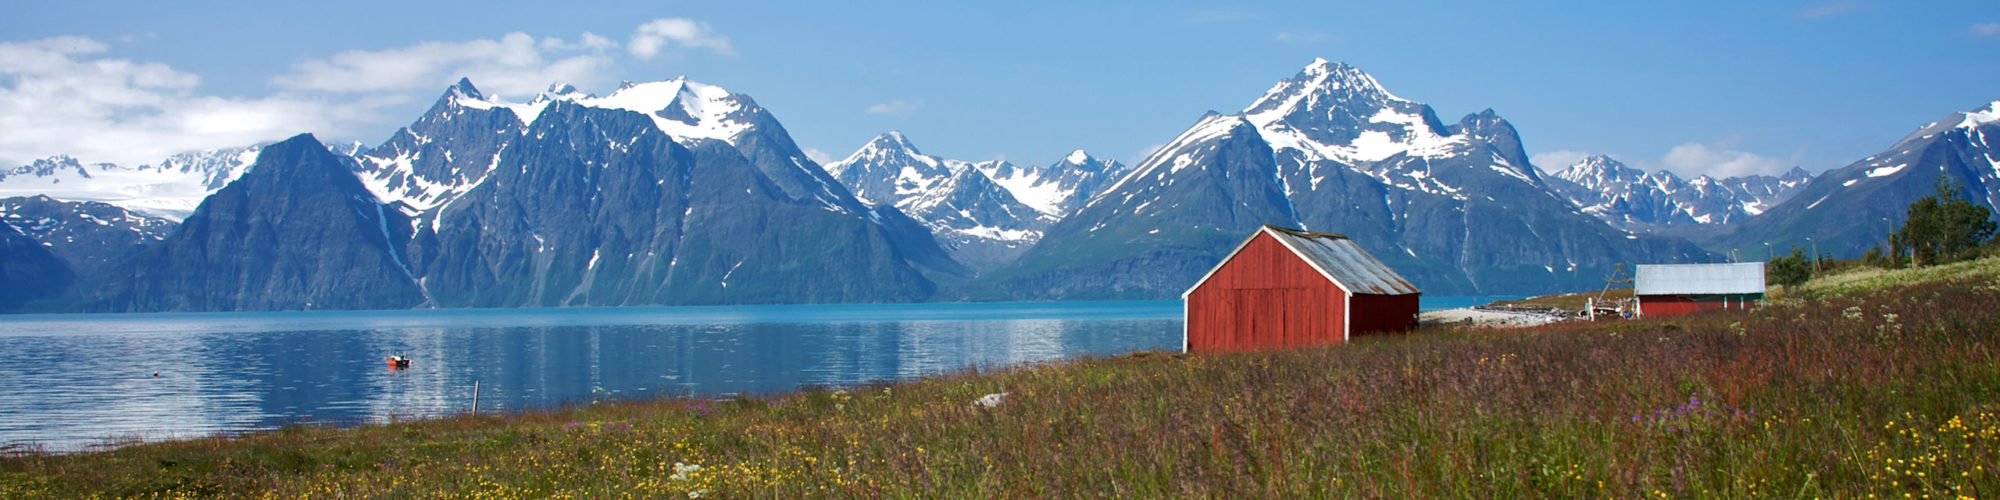 Norway Travel travel agents packages deals